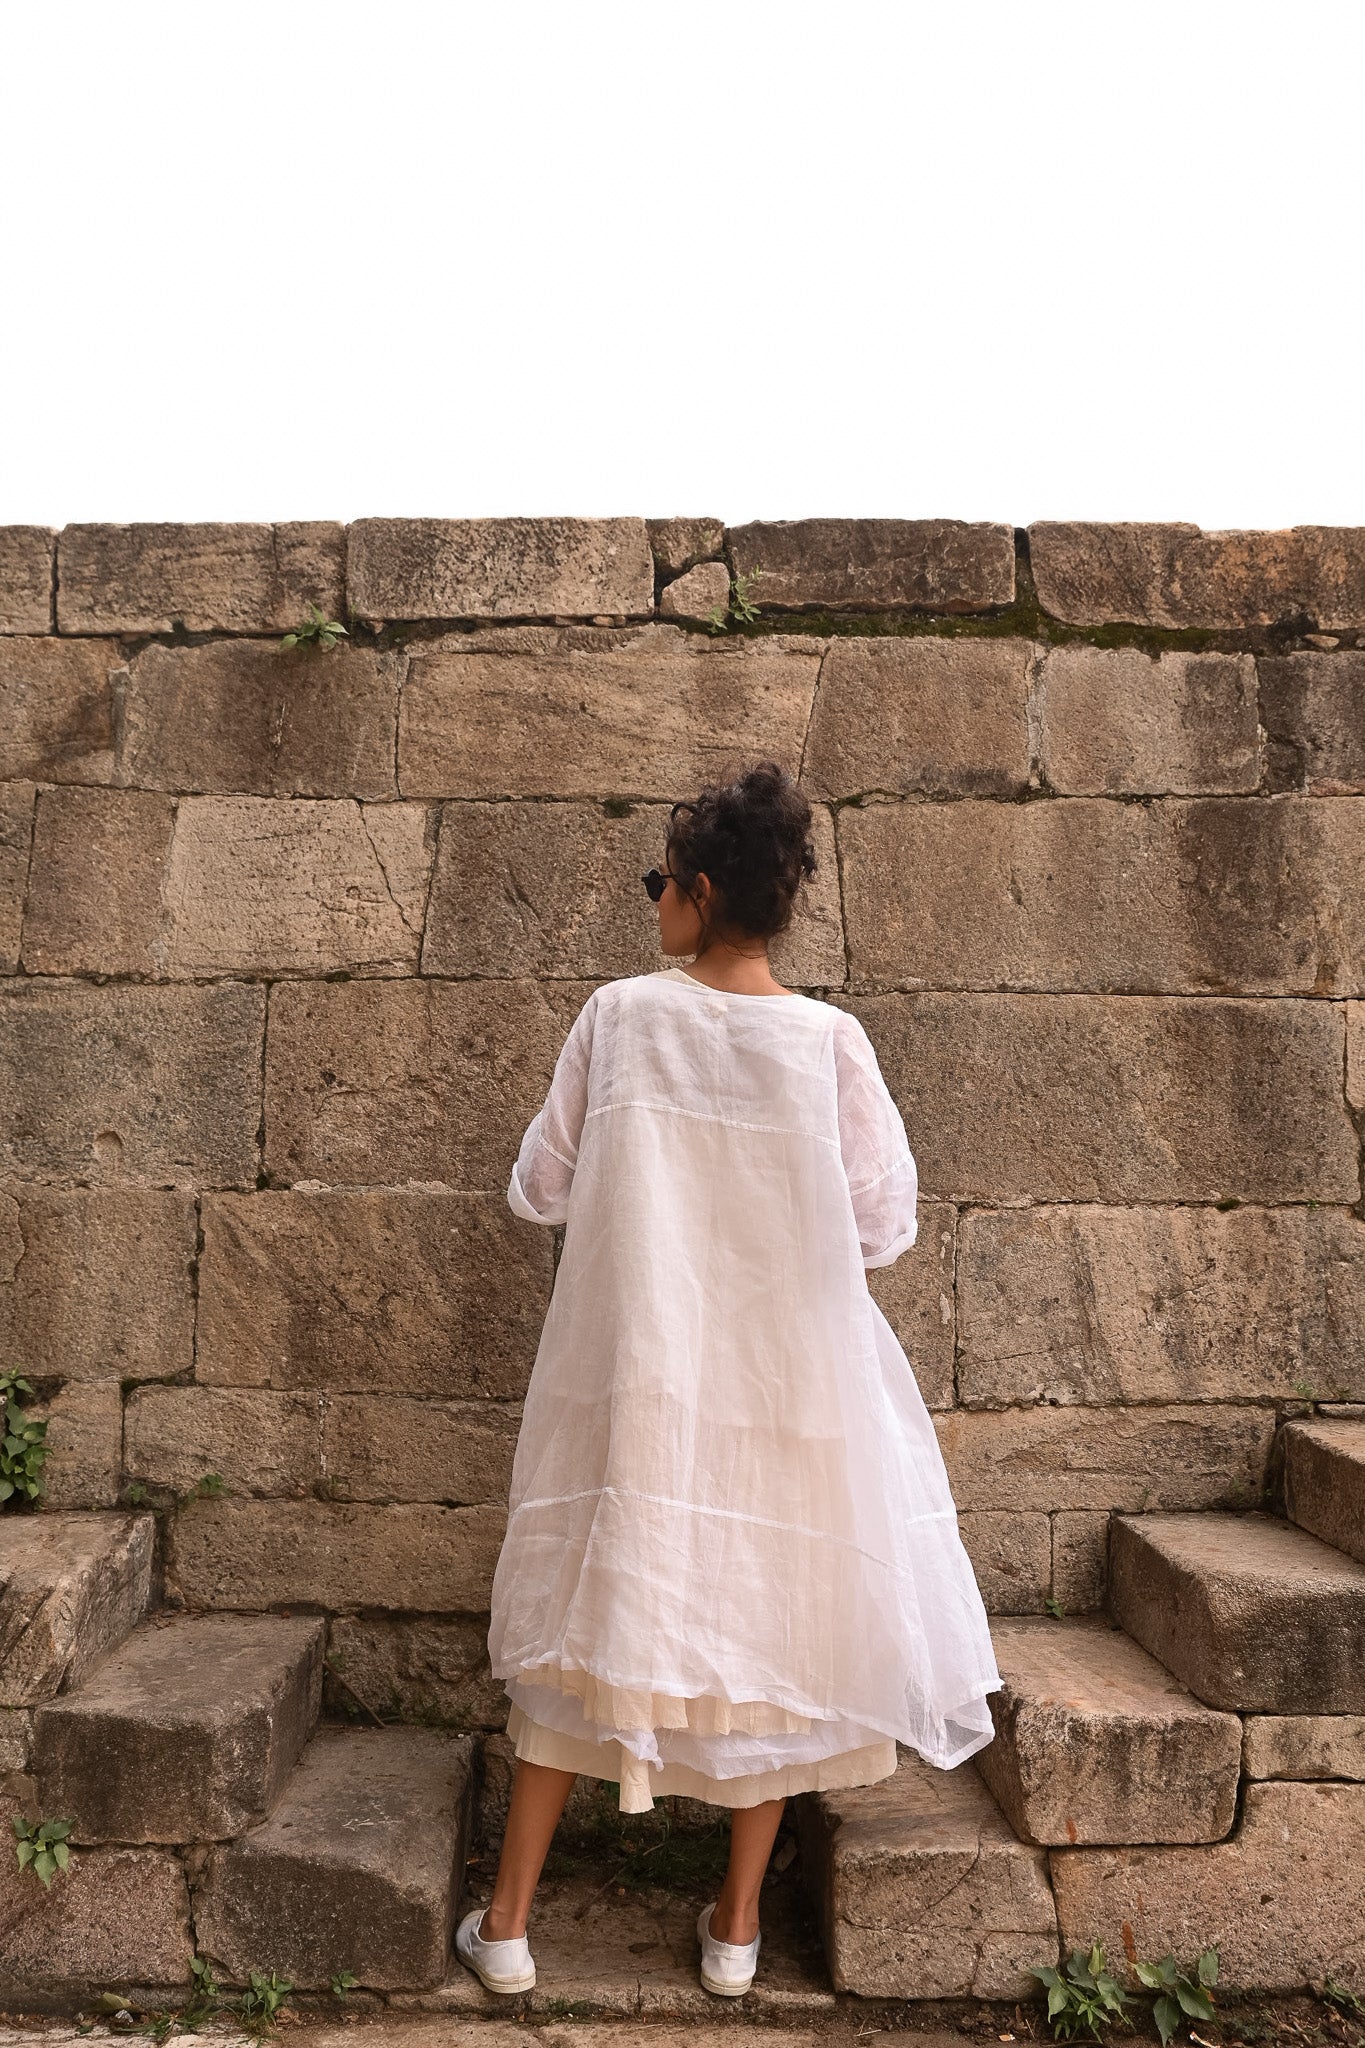 A MegbyDesign model is wearing a white prachi coat made from a crinkly cotton organdy material, she is standing but facing away from the camera.